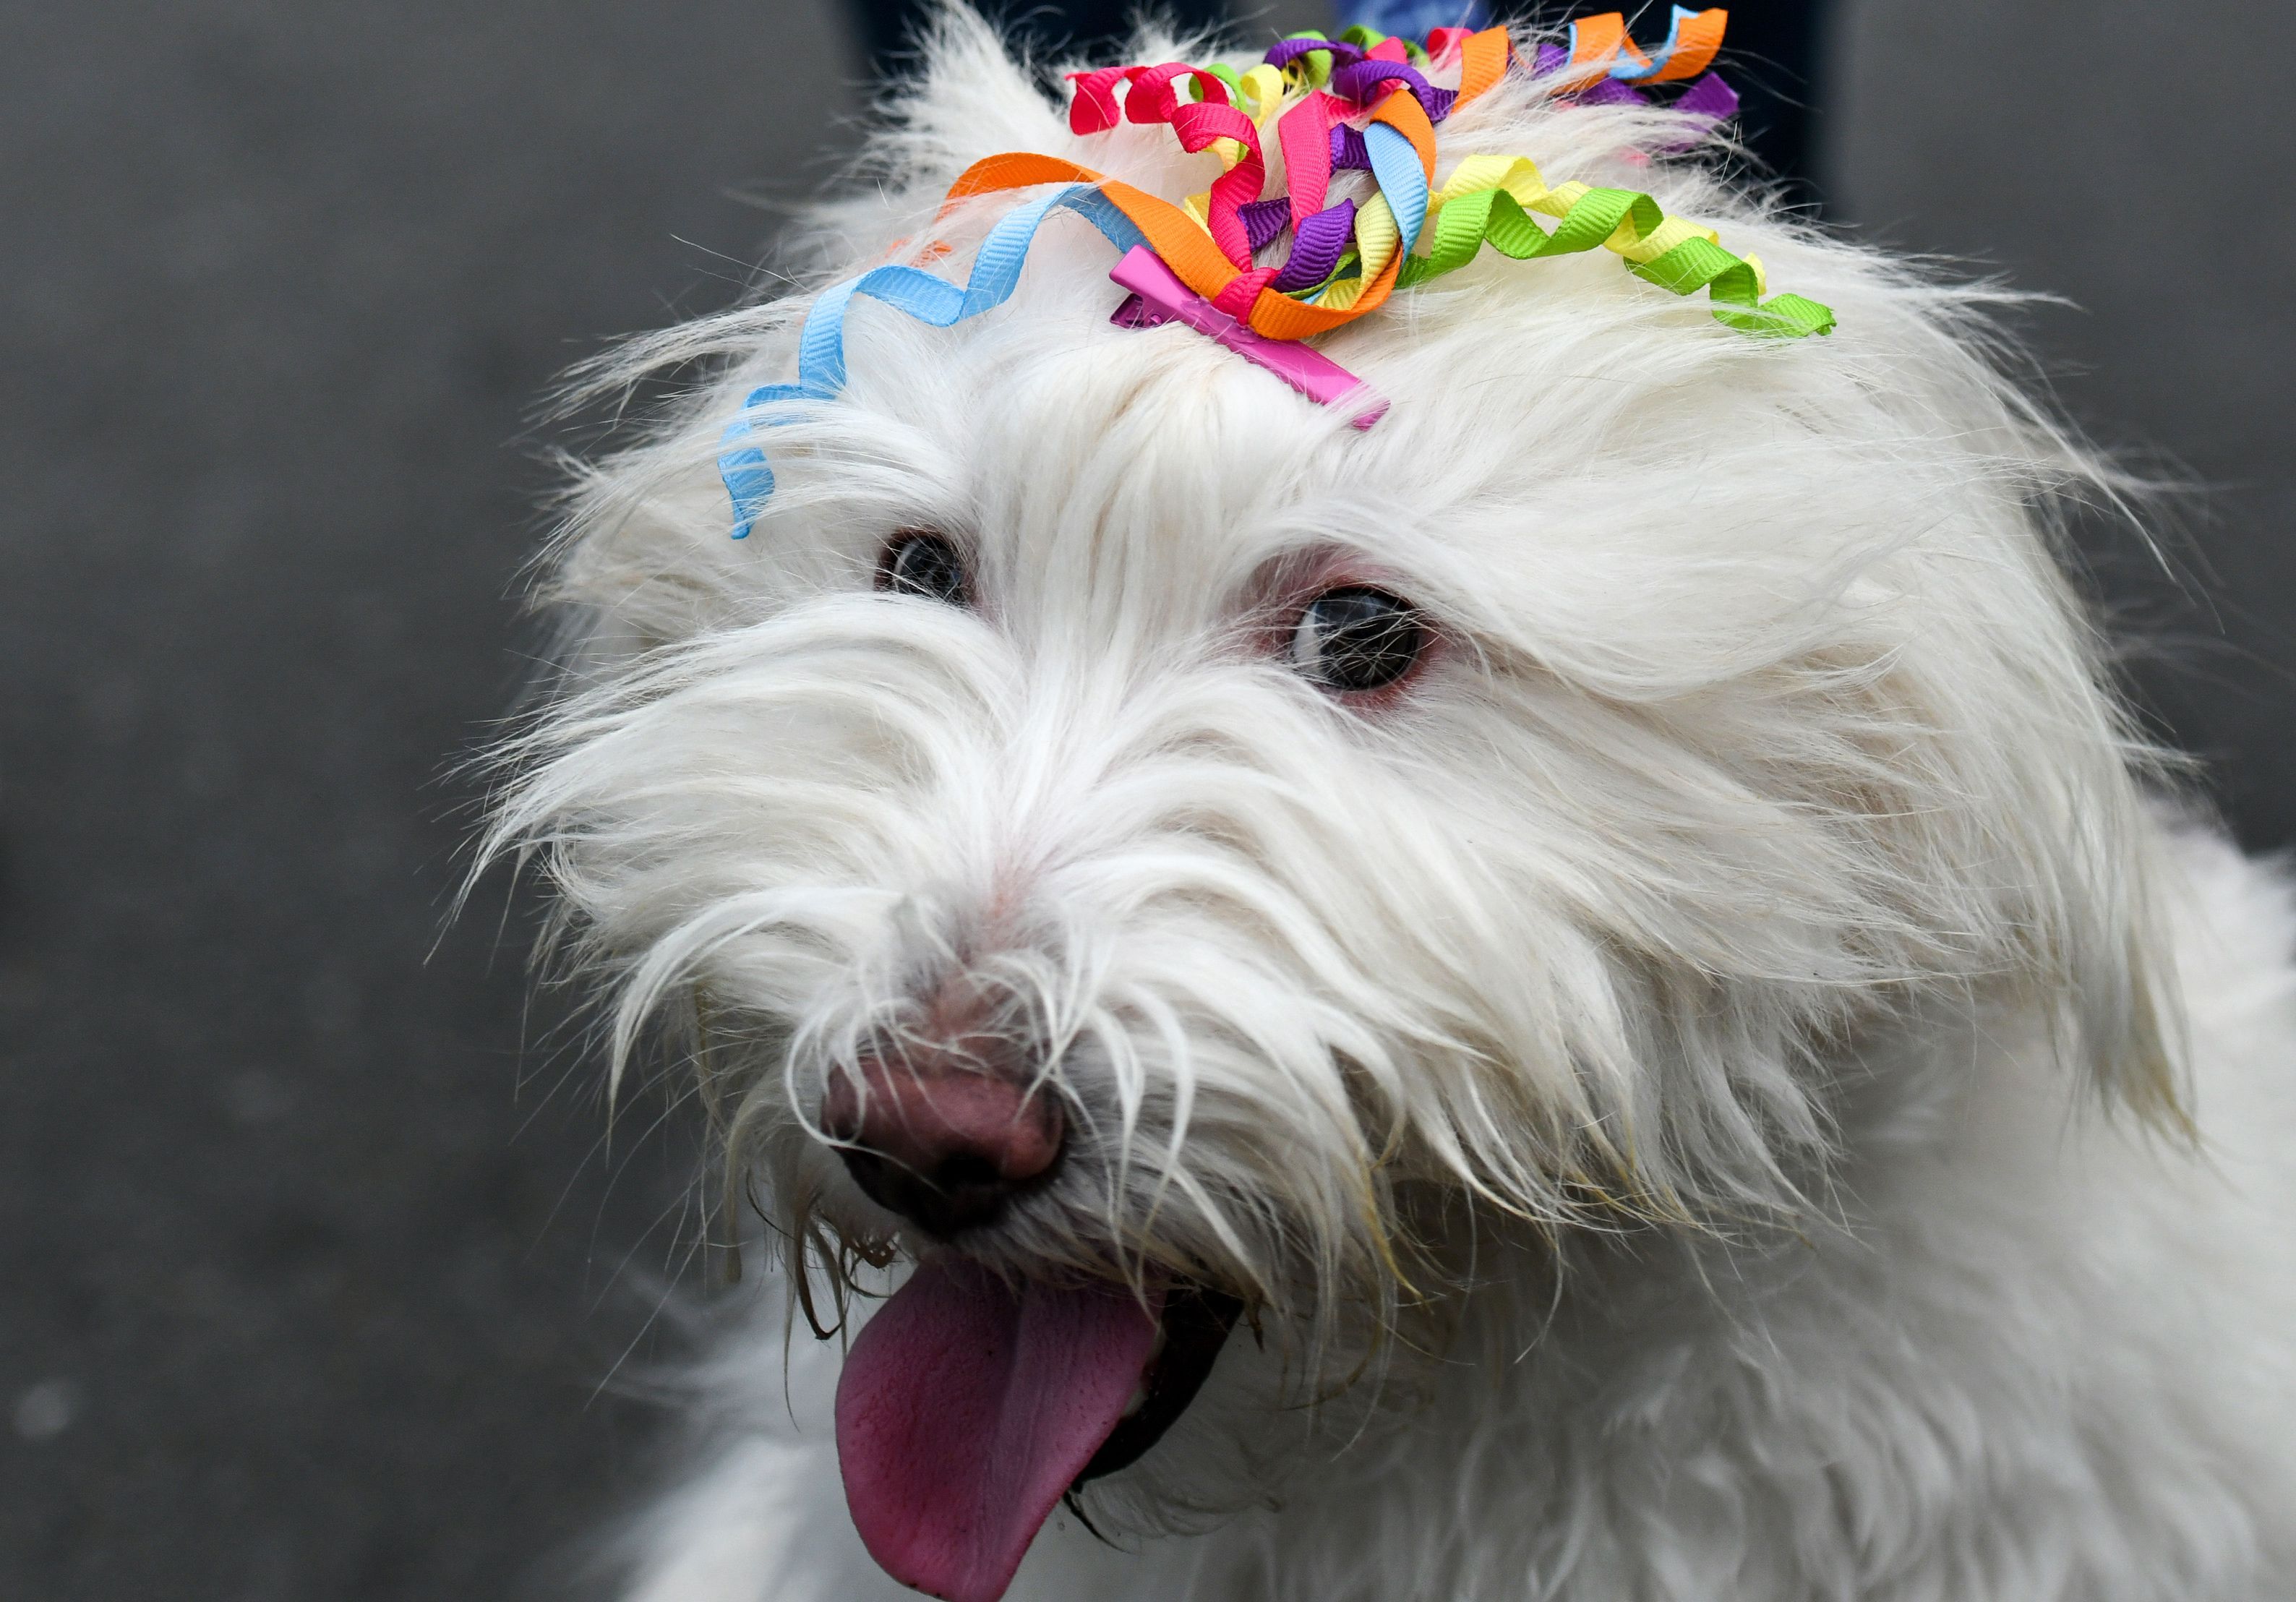 A dog has been decorated with rainbow color ribbons during a pride parade of the lesbian, gay, bisexual, transgender (LGBT) community in Chennai on June 30.